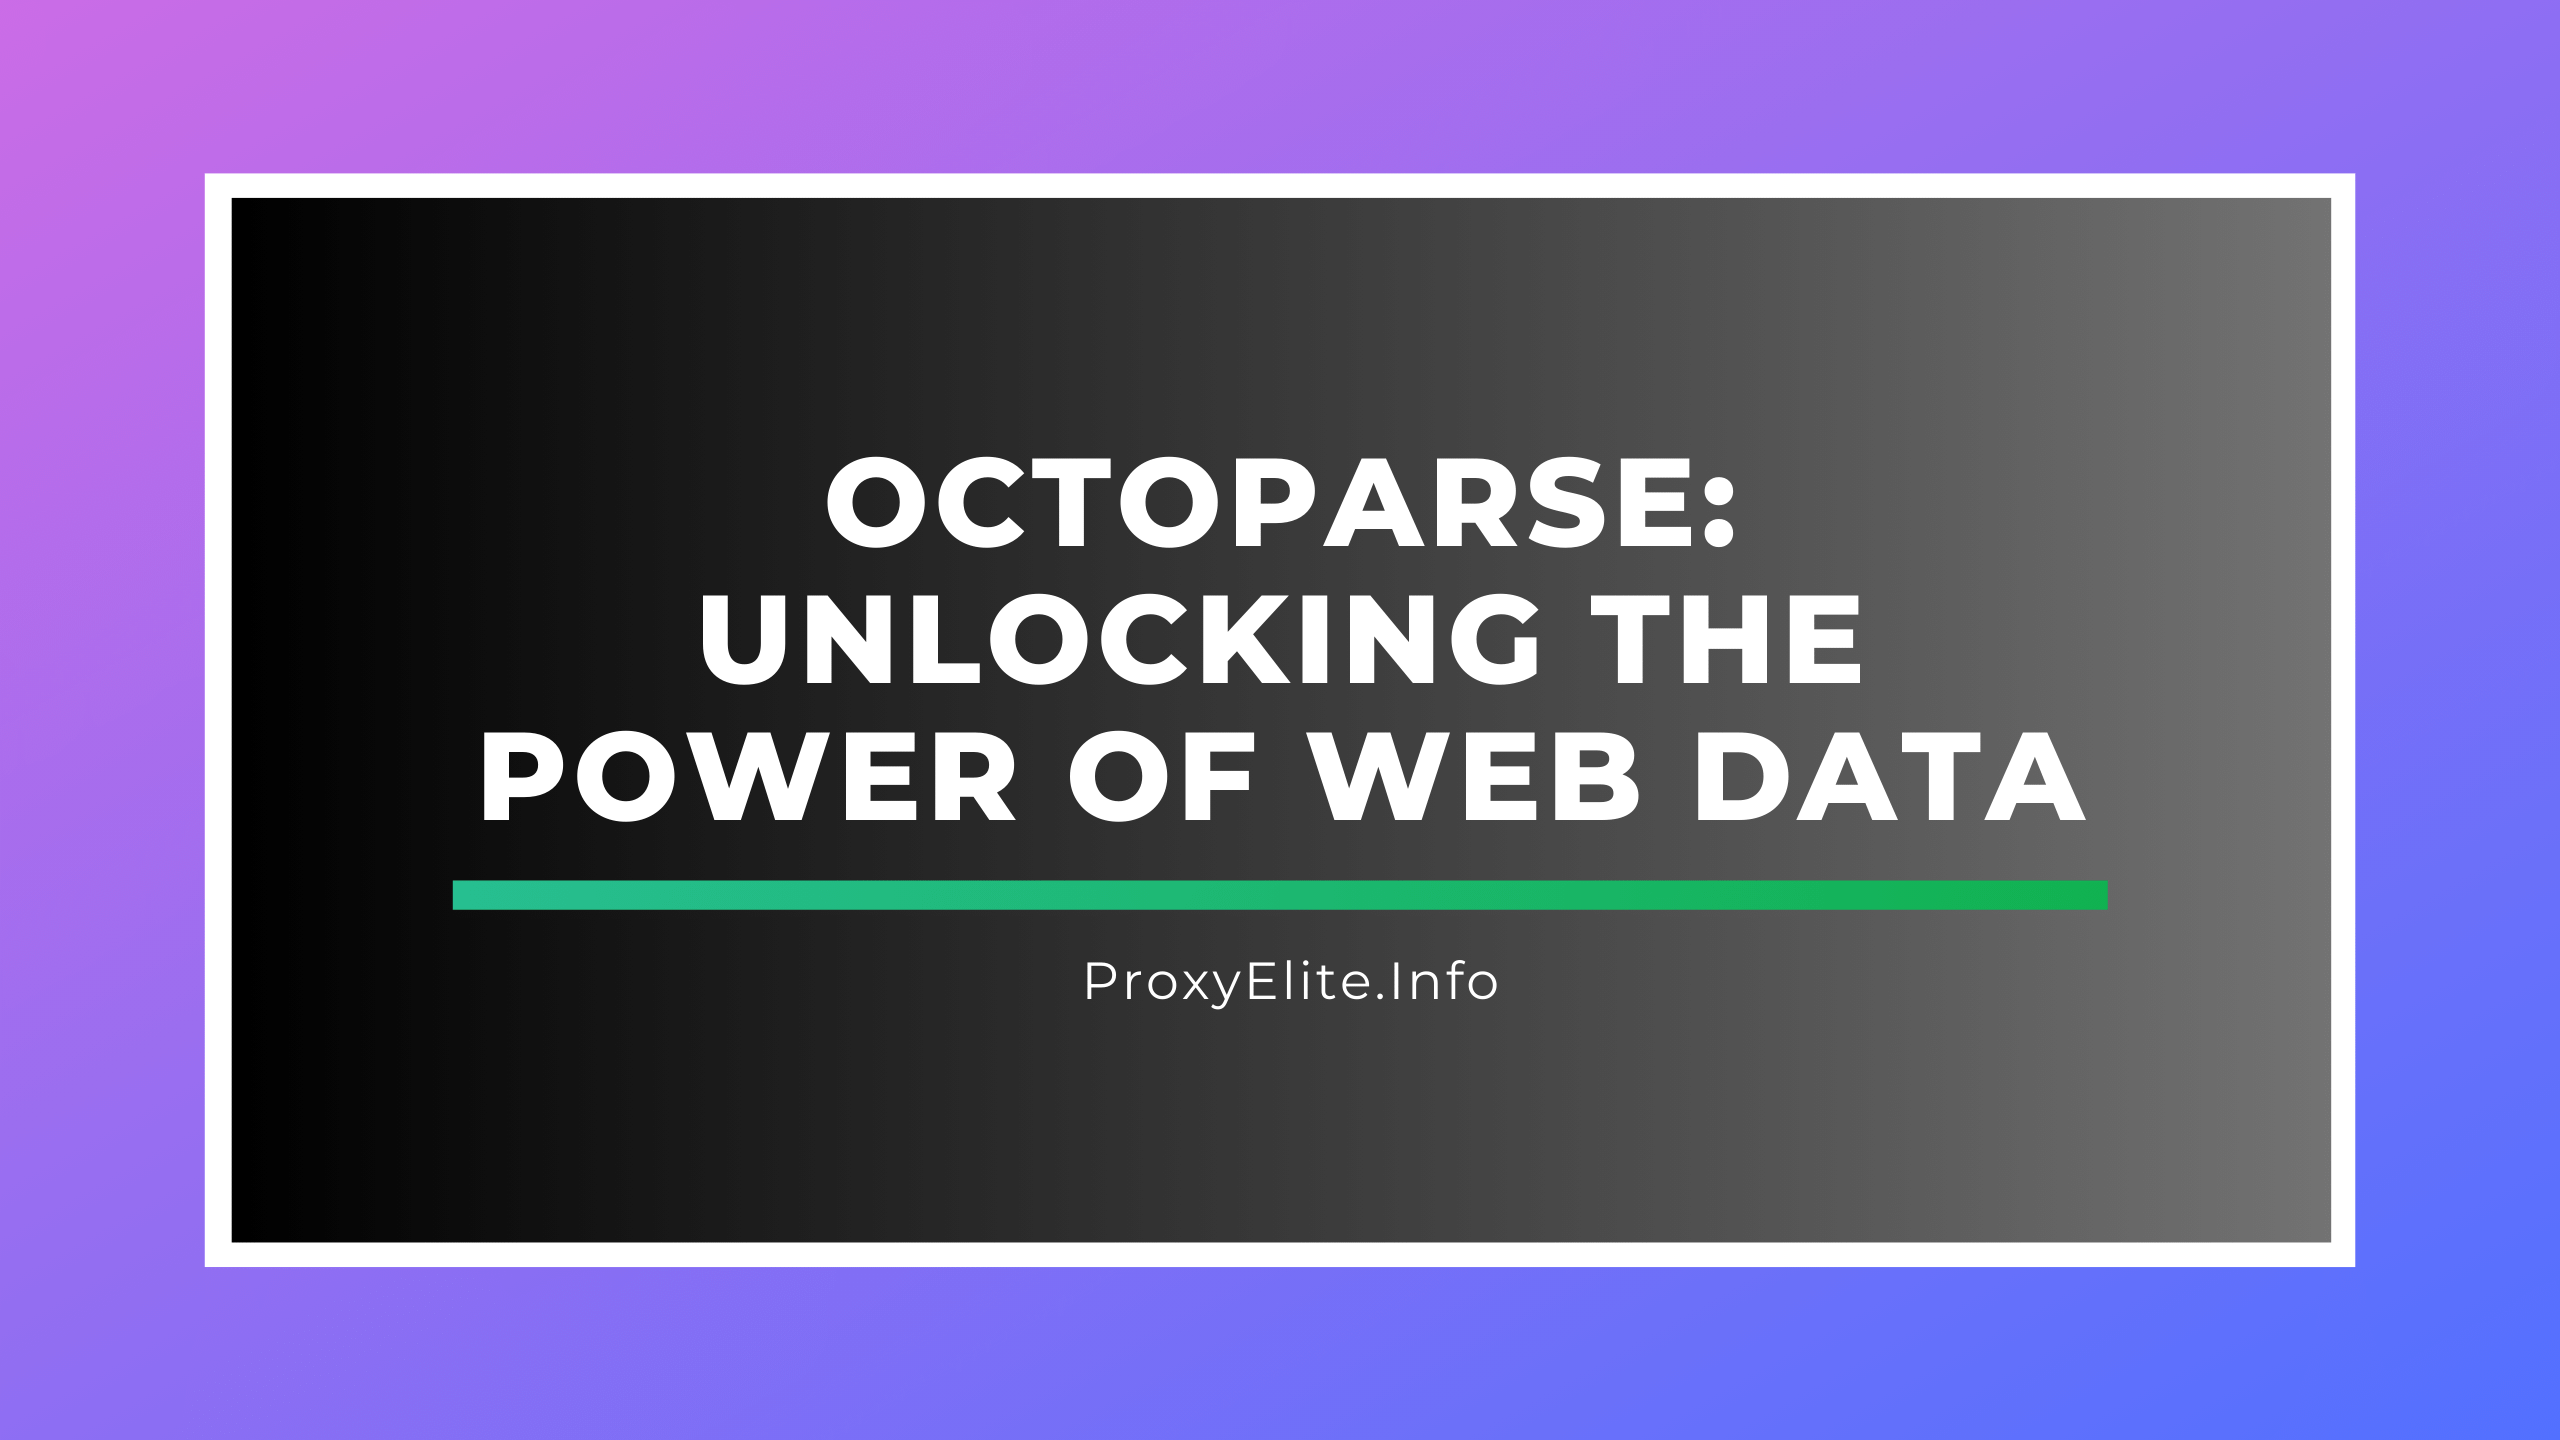 Octoparse: Unlocking the Power of Web Data